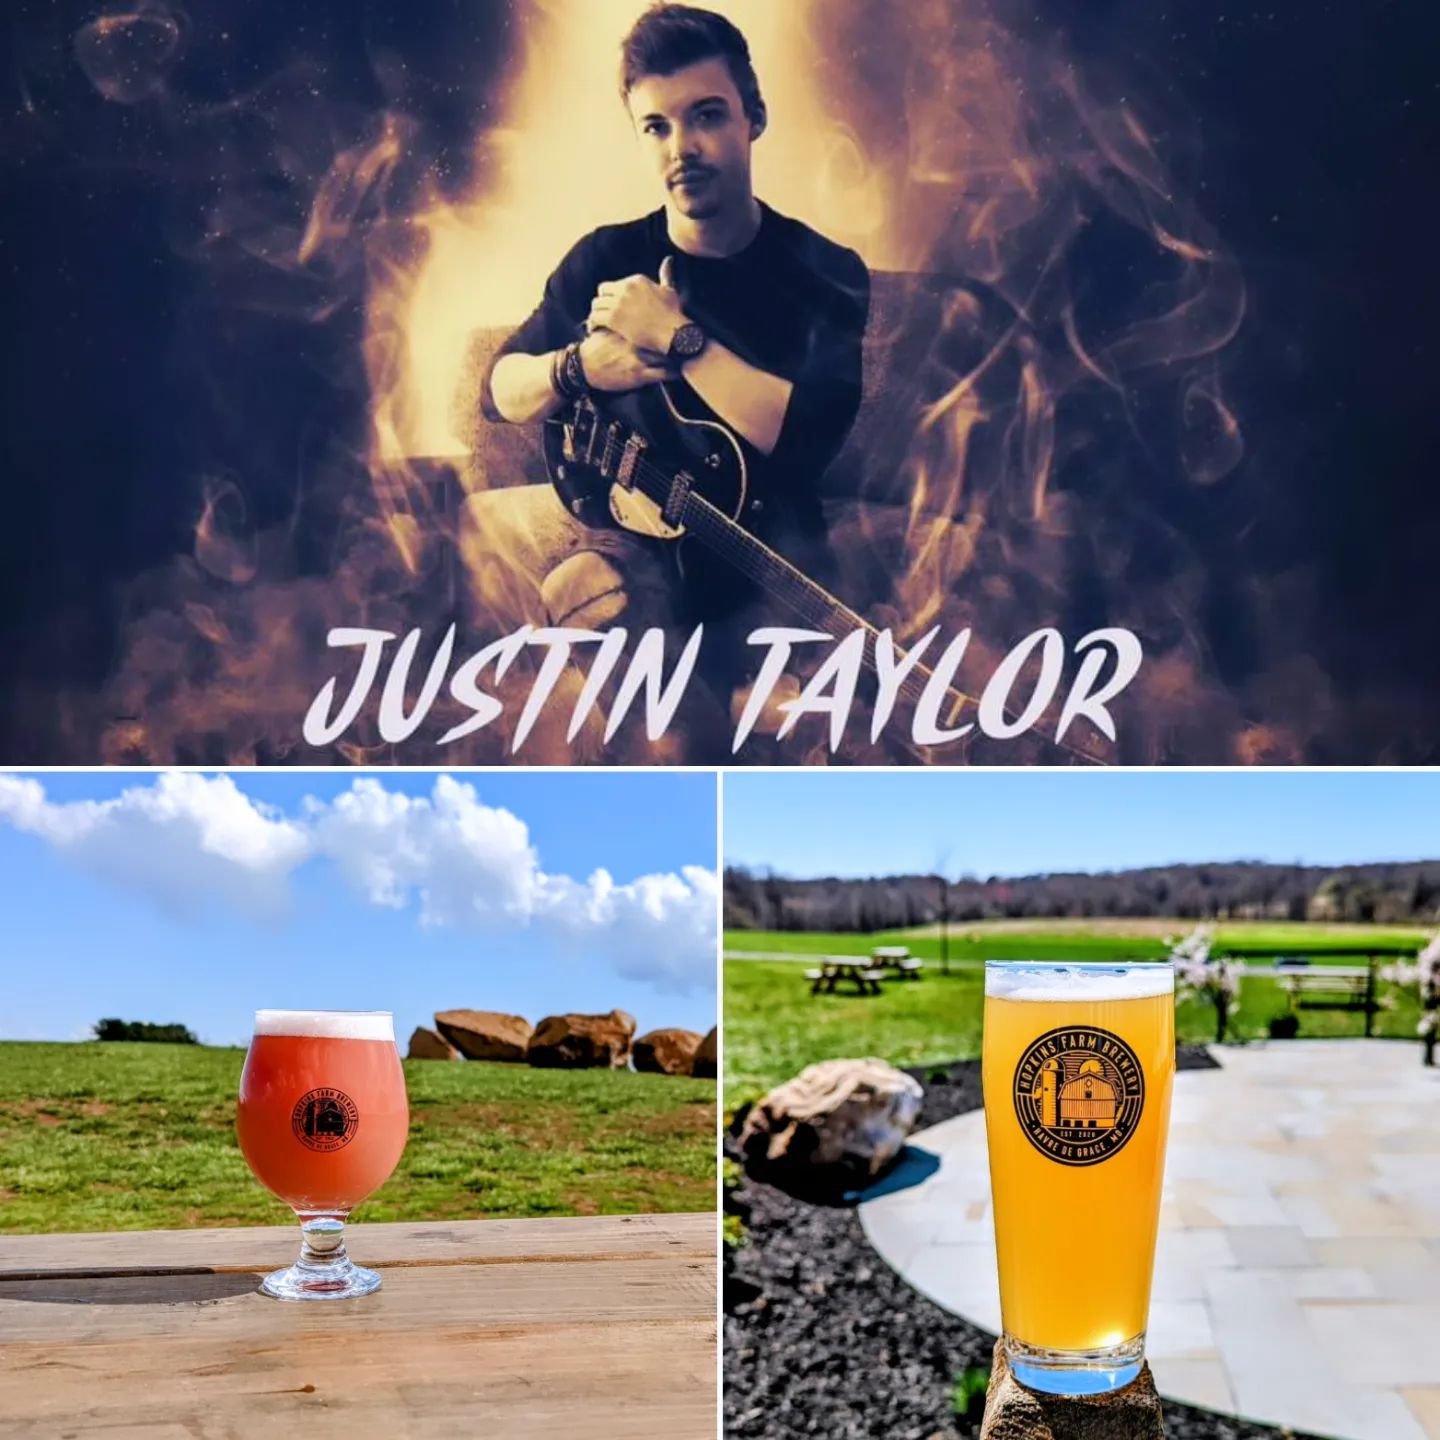 TGIF!

Get your weekend started with @410Empanadas at 12PM and @OldLineGrill at 4PM, then stay for @justintaylormd and his band- they will be playing for the first time at 5PM!